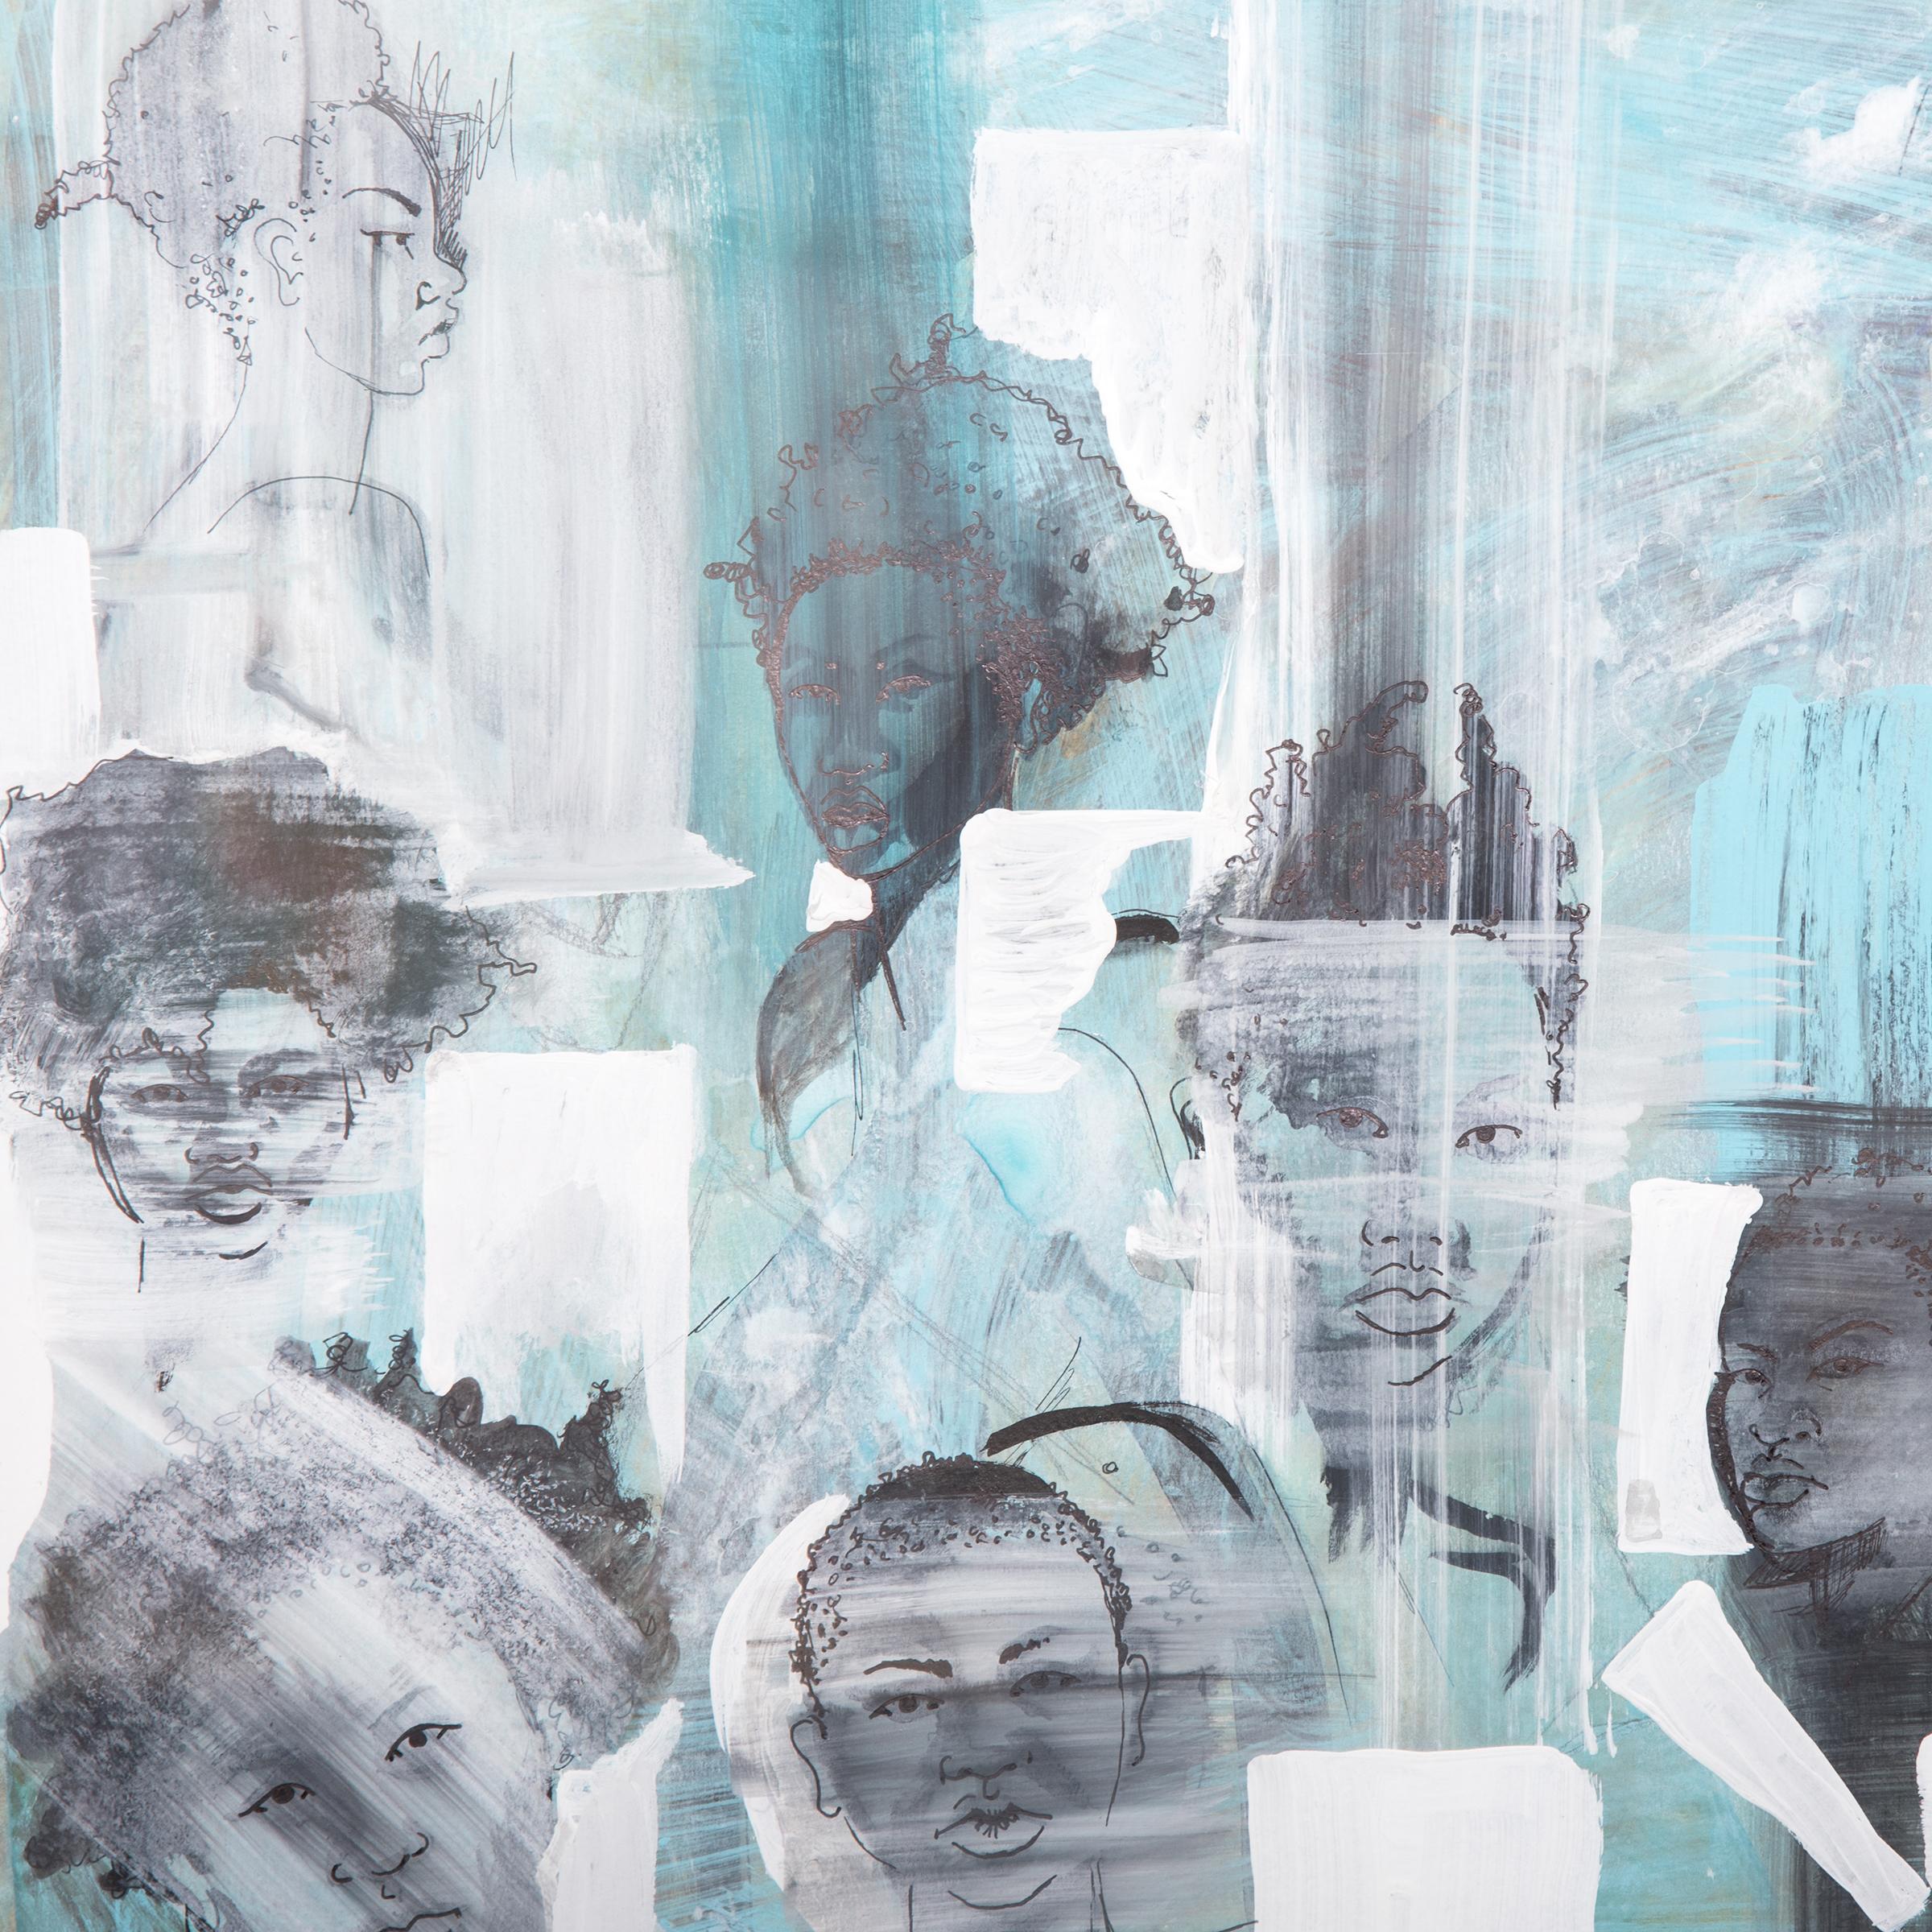 Tracy Crump uses washes of grey, white and aqua to both conceal and reveal sensitively drawn figures. Each figure stands alone as an individual, possessing unique features and hairstyles, and yet, as the title of the series suggests the men and